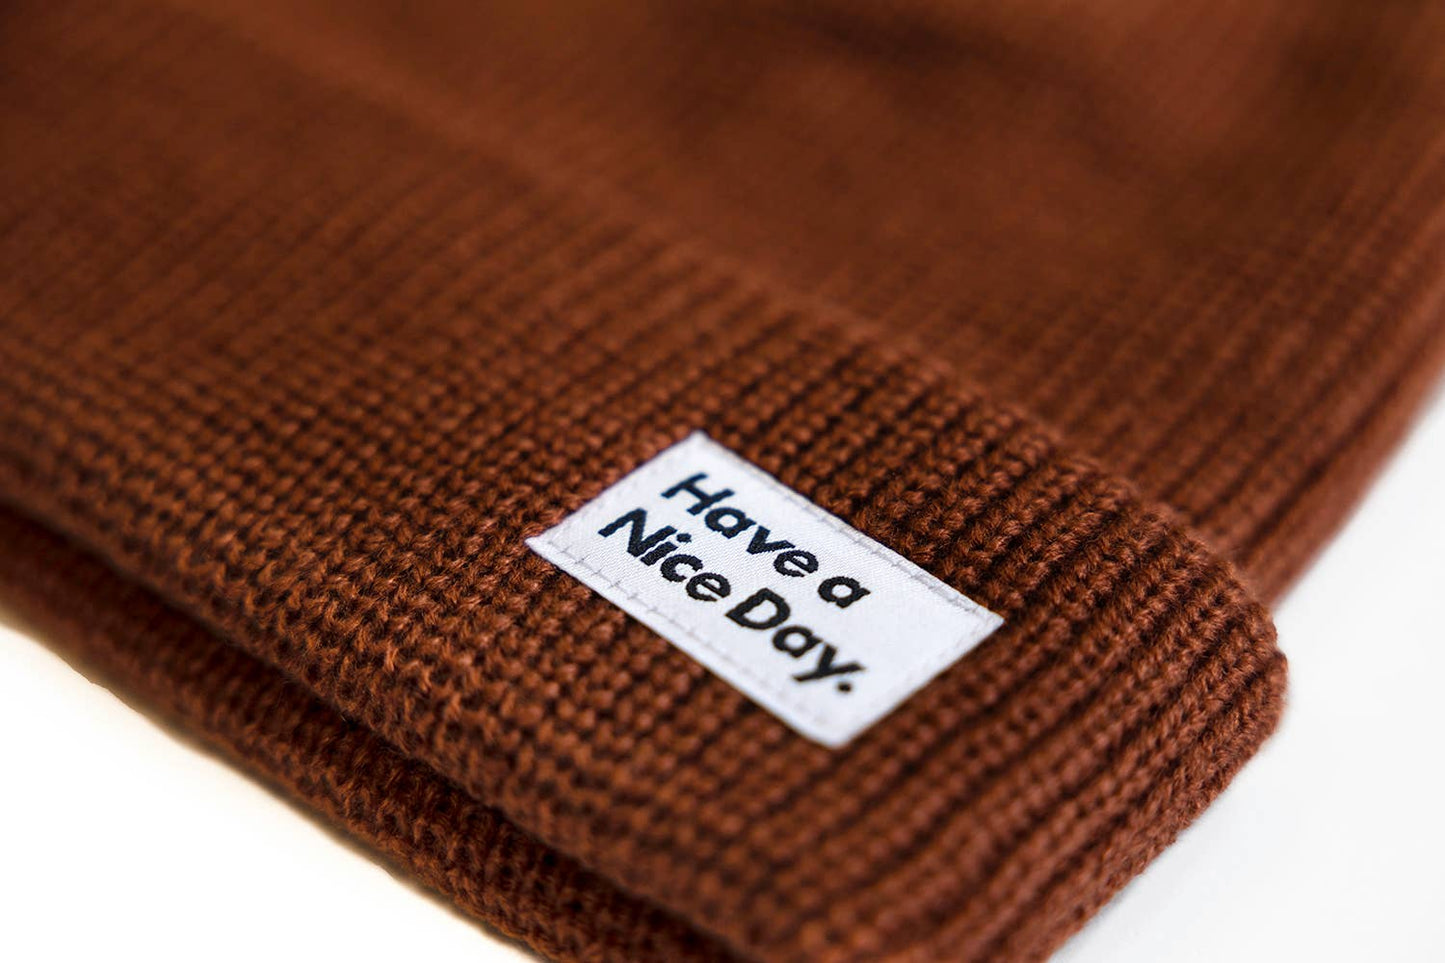 Beanie | Have A Nice Day